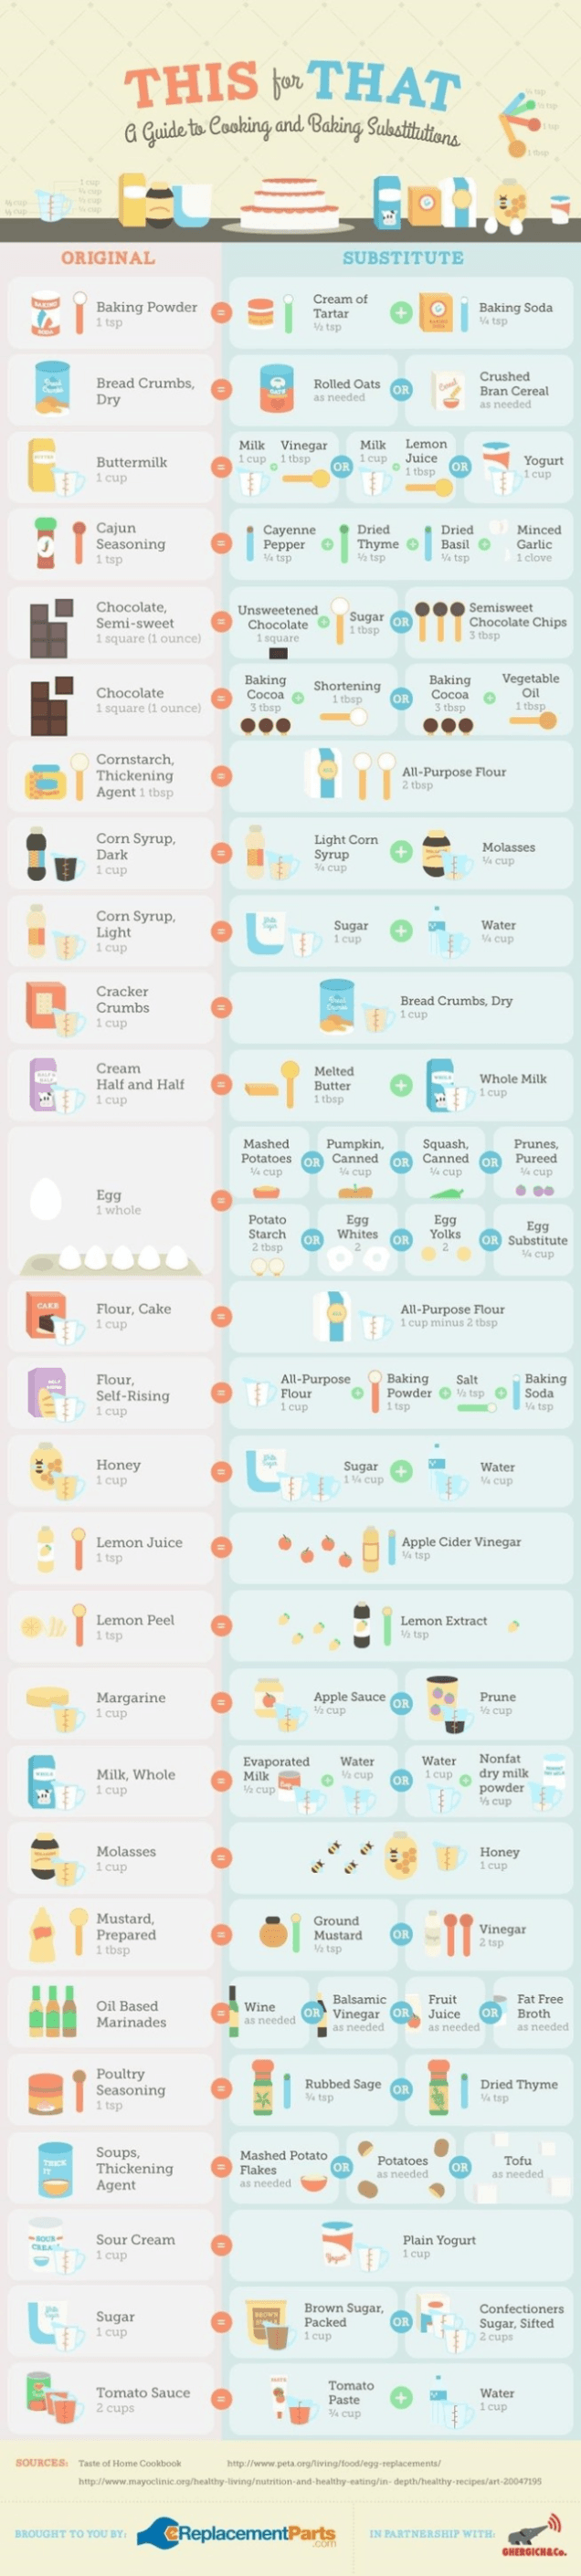 this-for-that-a-guide-for-cooking-and-baking-substitutions-infographic